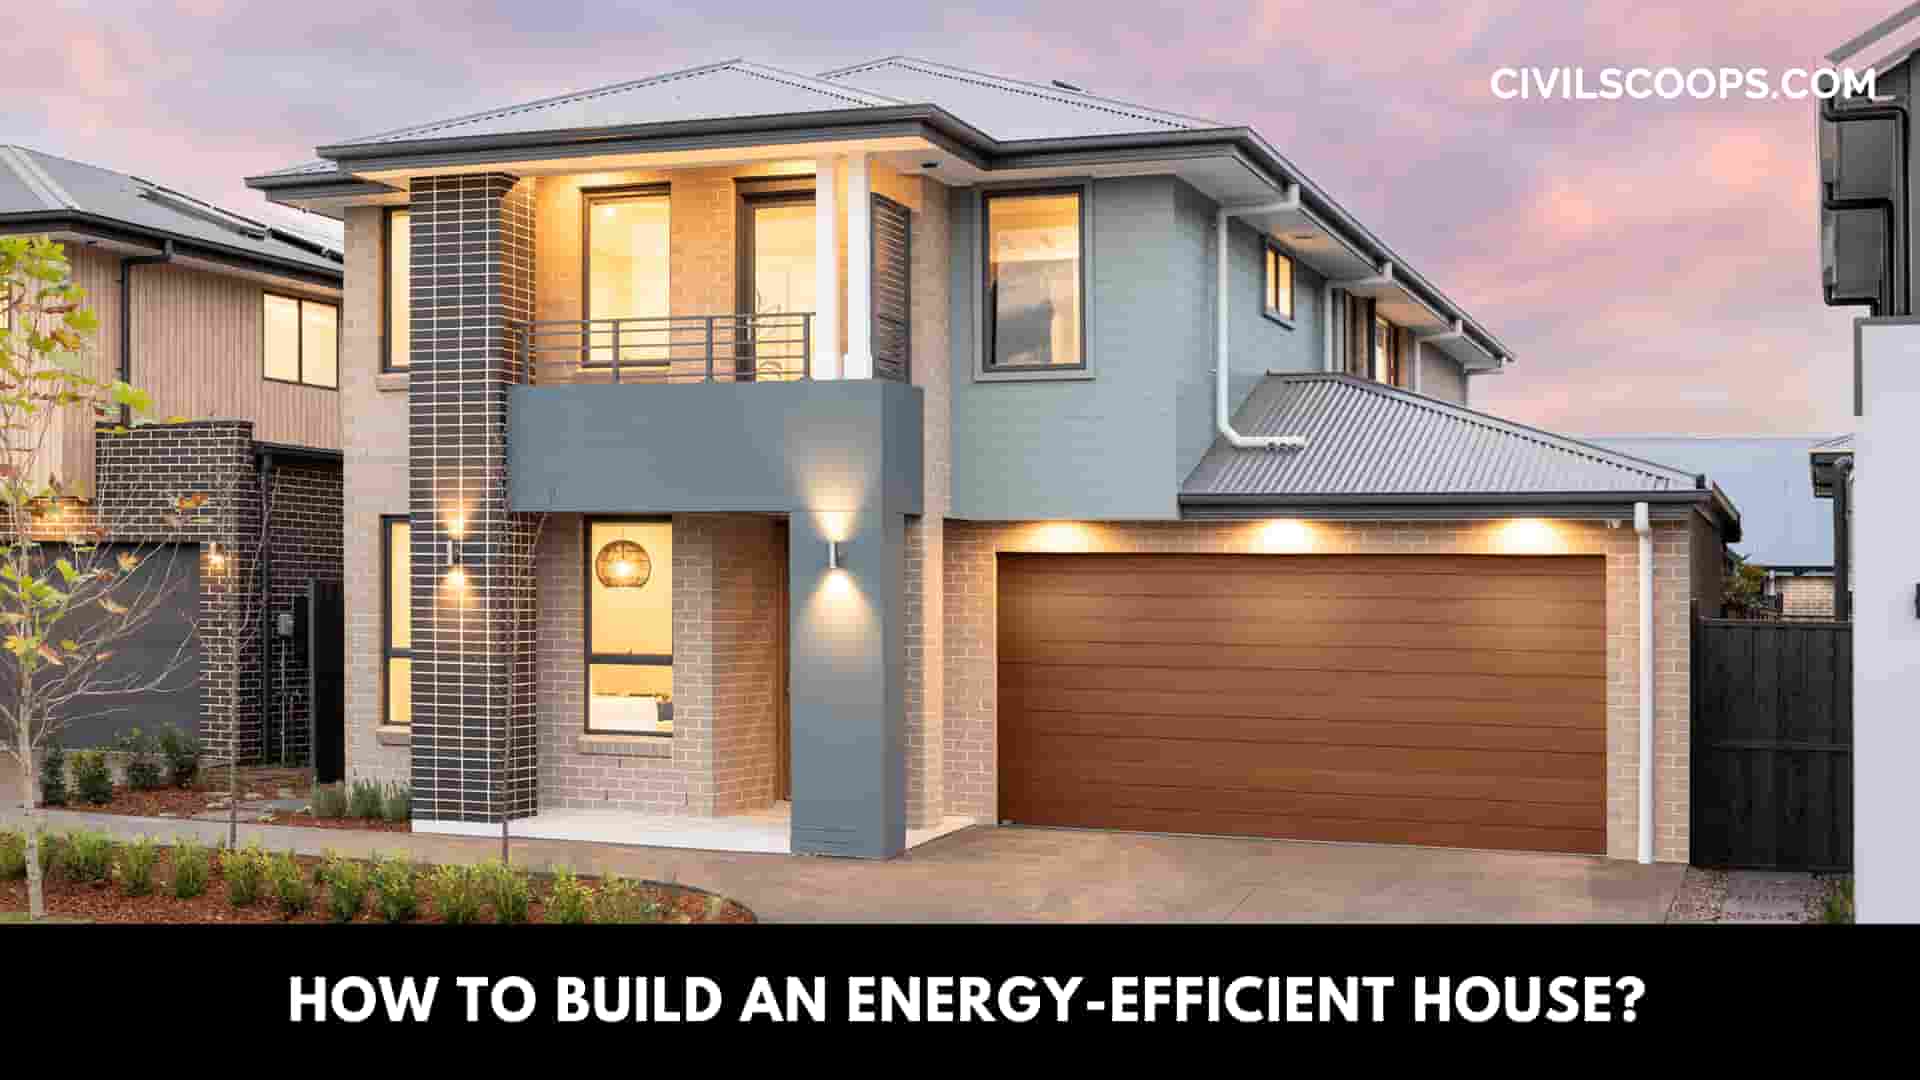 How to Build an Energy-Efficient House